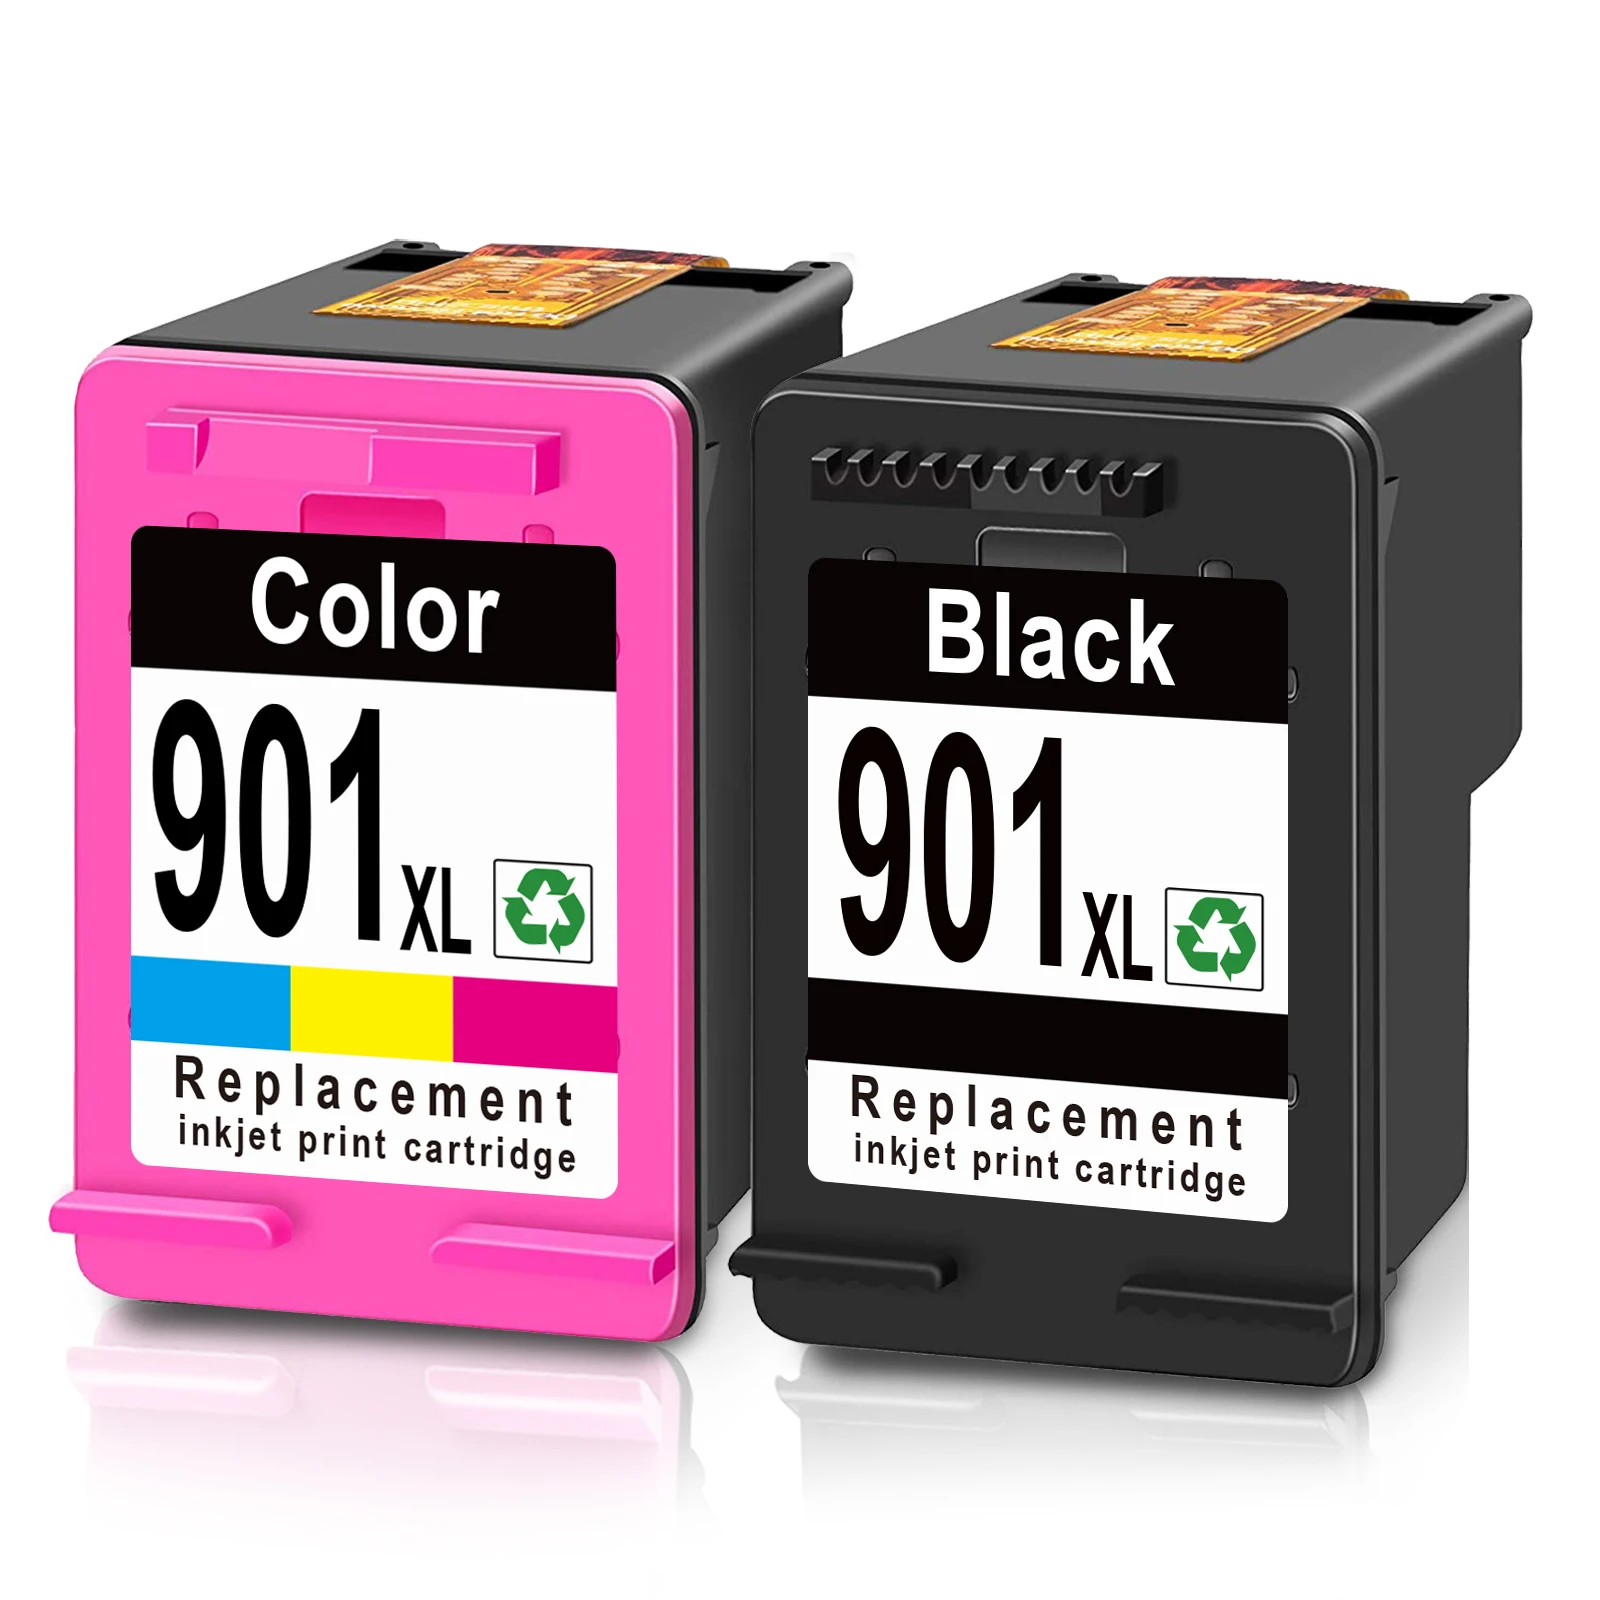 ShinColor for HP 901XL Cartridge Replacement for HP 901 Ink Cartridge for Officejet 4500 J4500 J4540 J4550 J4580 J4640 4680